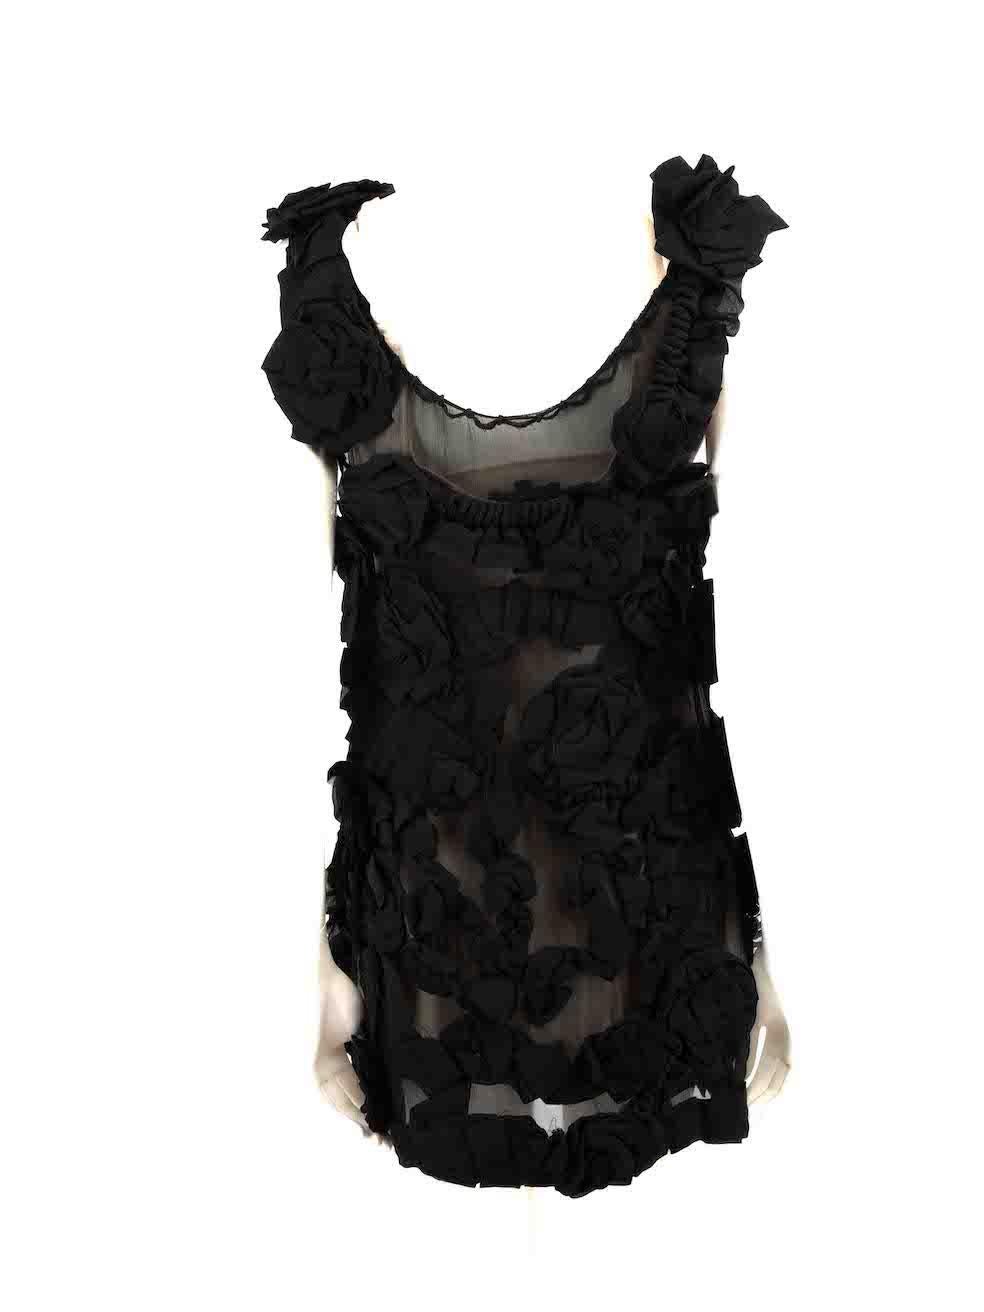 Nathan Jenden Black Silk Sheer Dress with Slip Size XS In Good Condition For Sale In London, GB